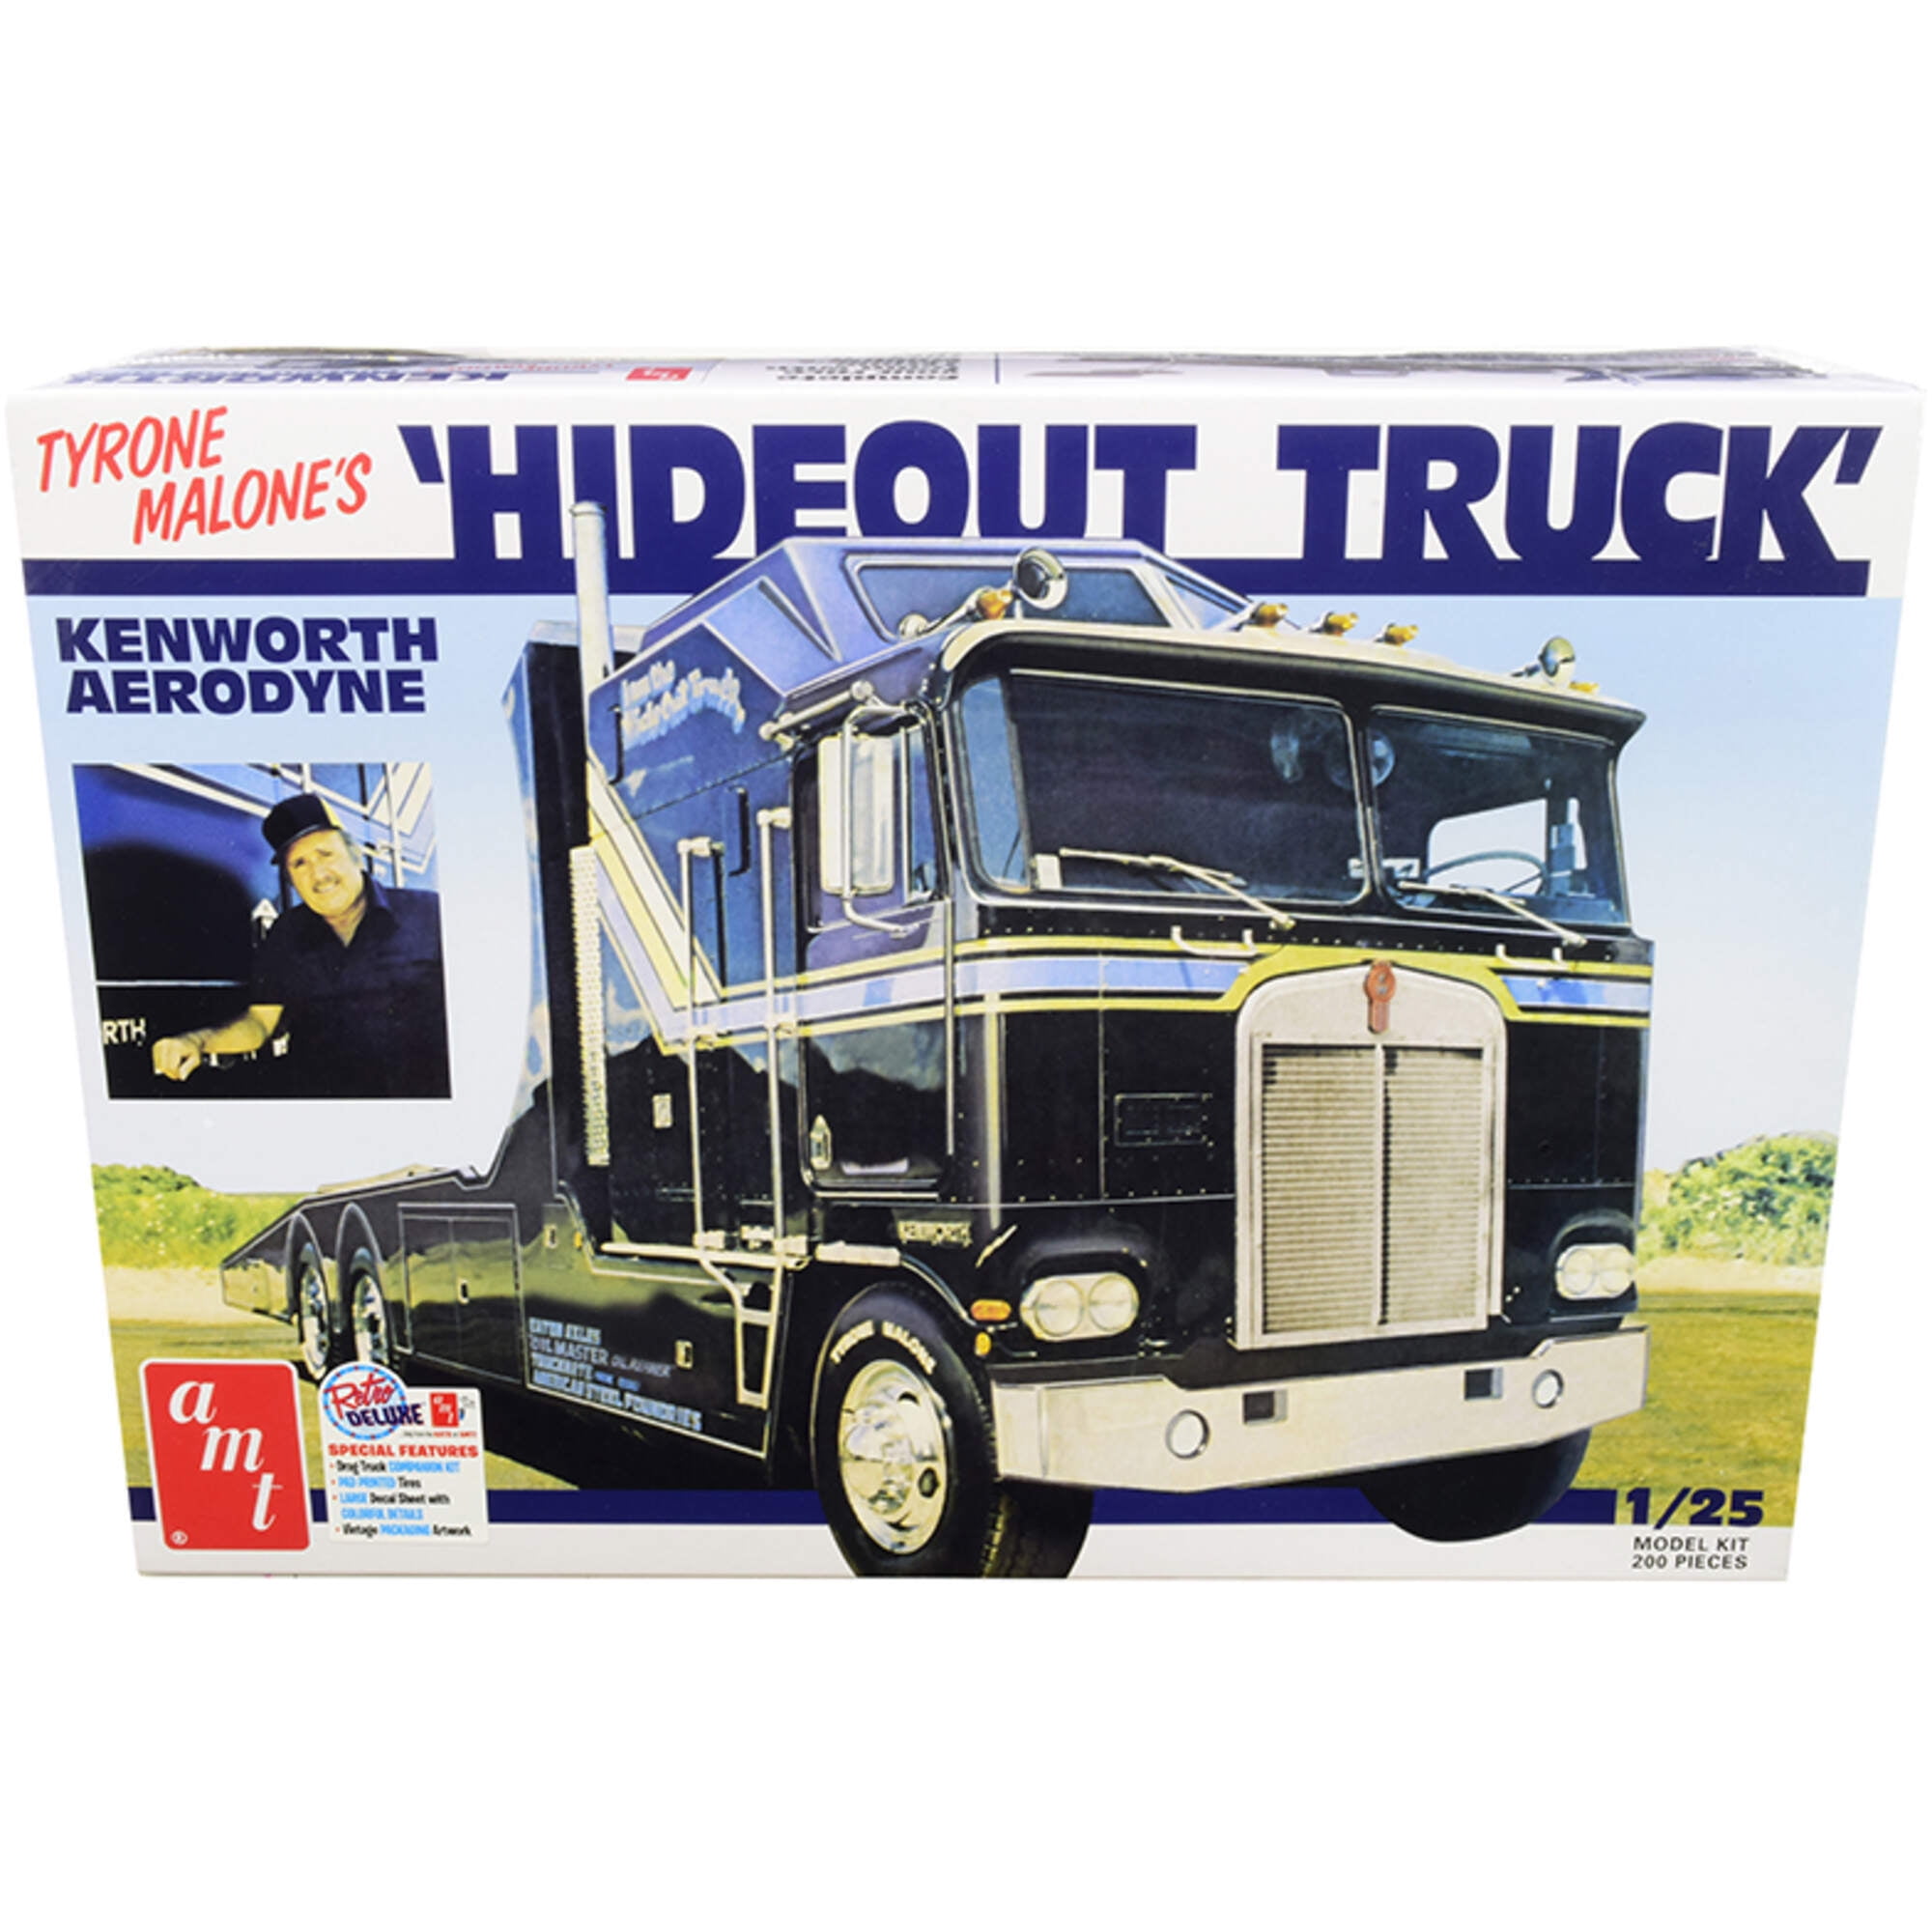 Picture of AMT AMT1158 Skill 3 Model Kit Tyrone Malones Kenworth Aerodyne Hideout Truck 1 by 25 Scale Model